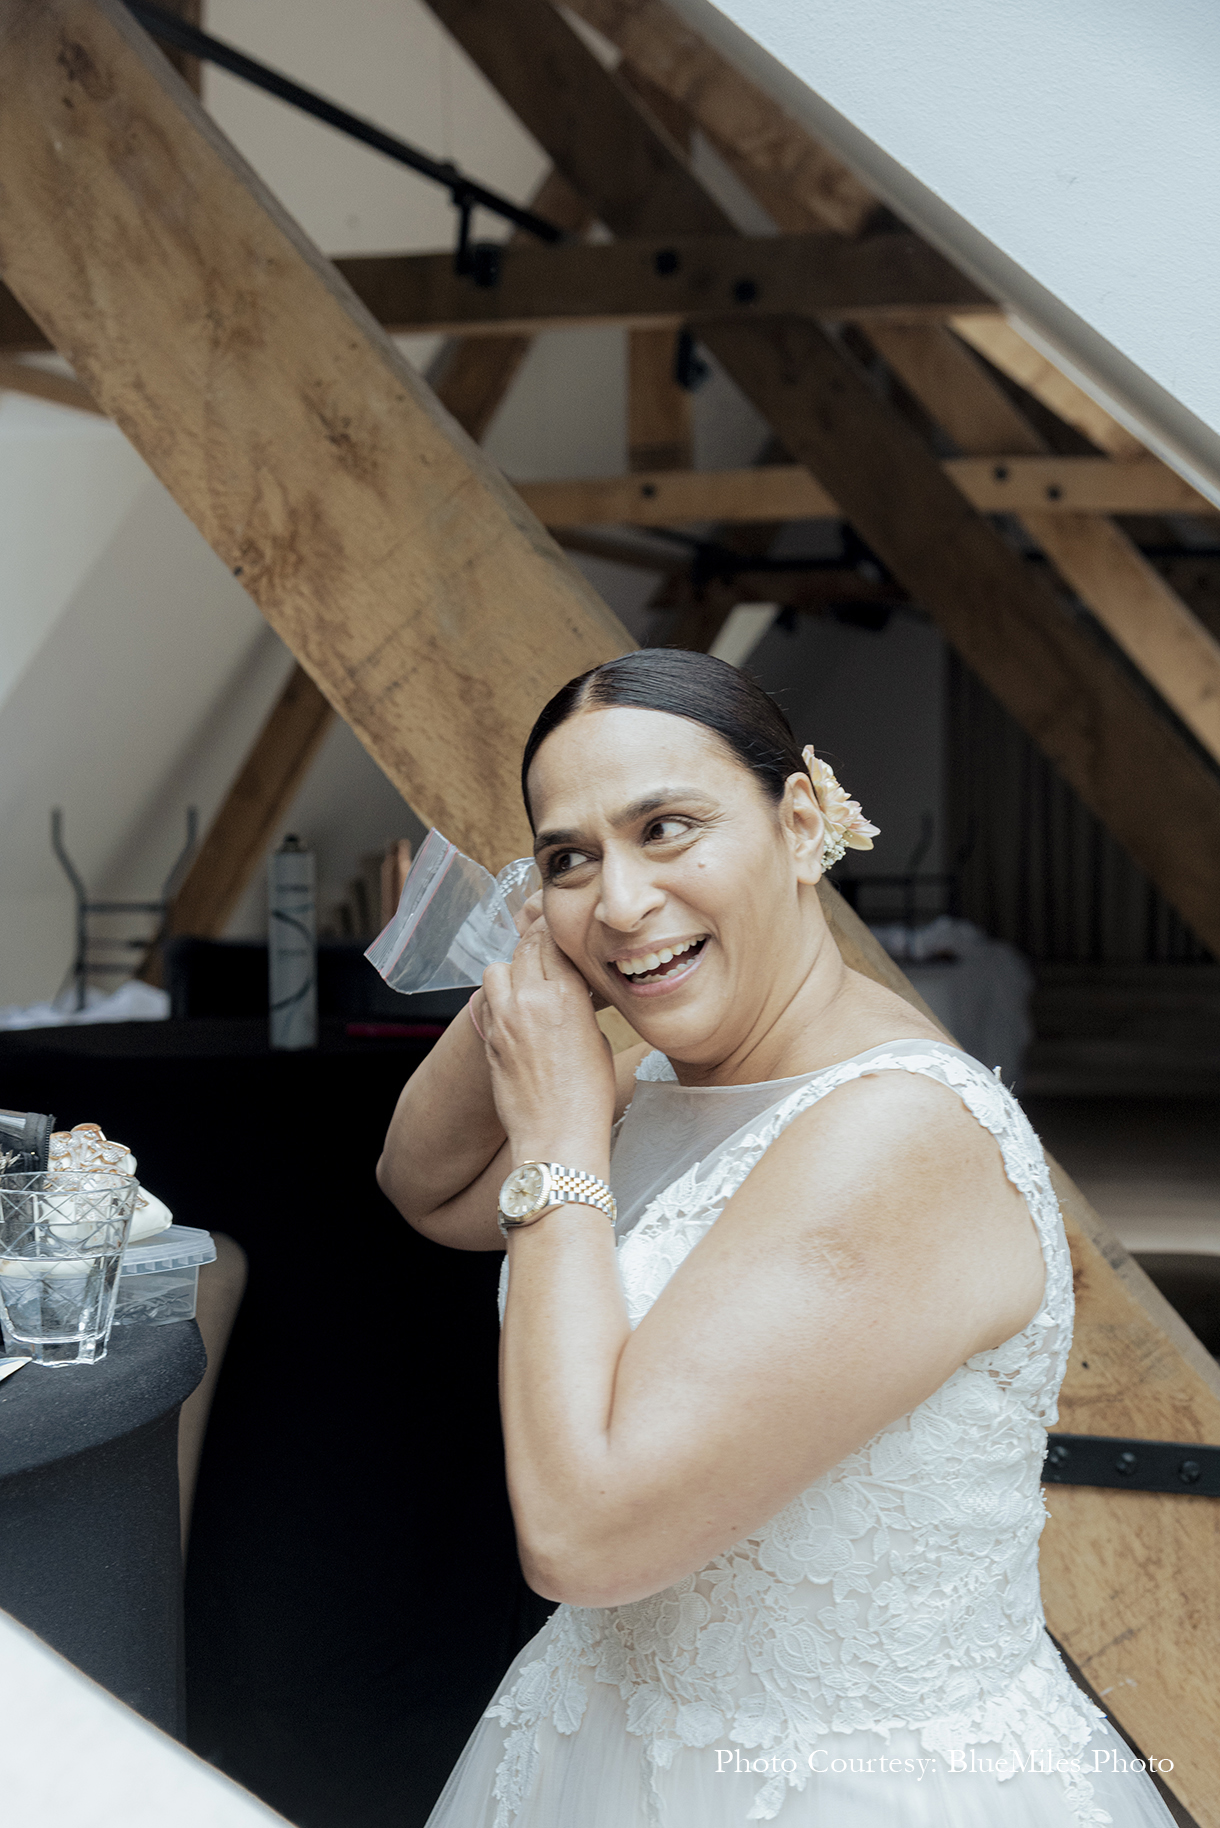 A whimsical white wedding in Belgium - Celebrating 25 years of love!